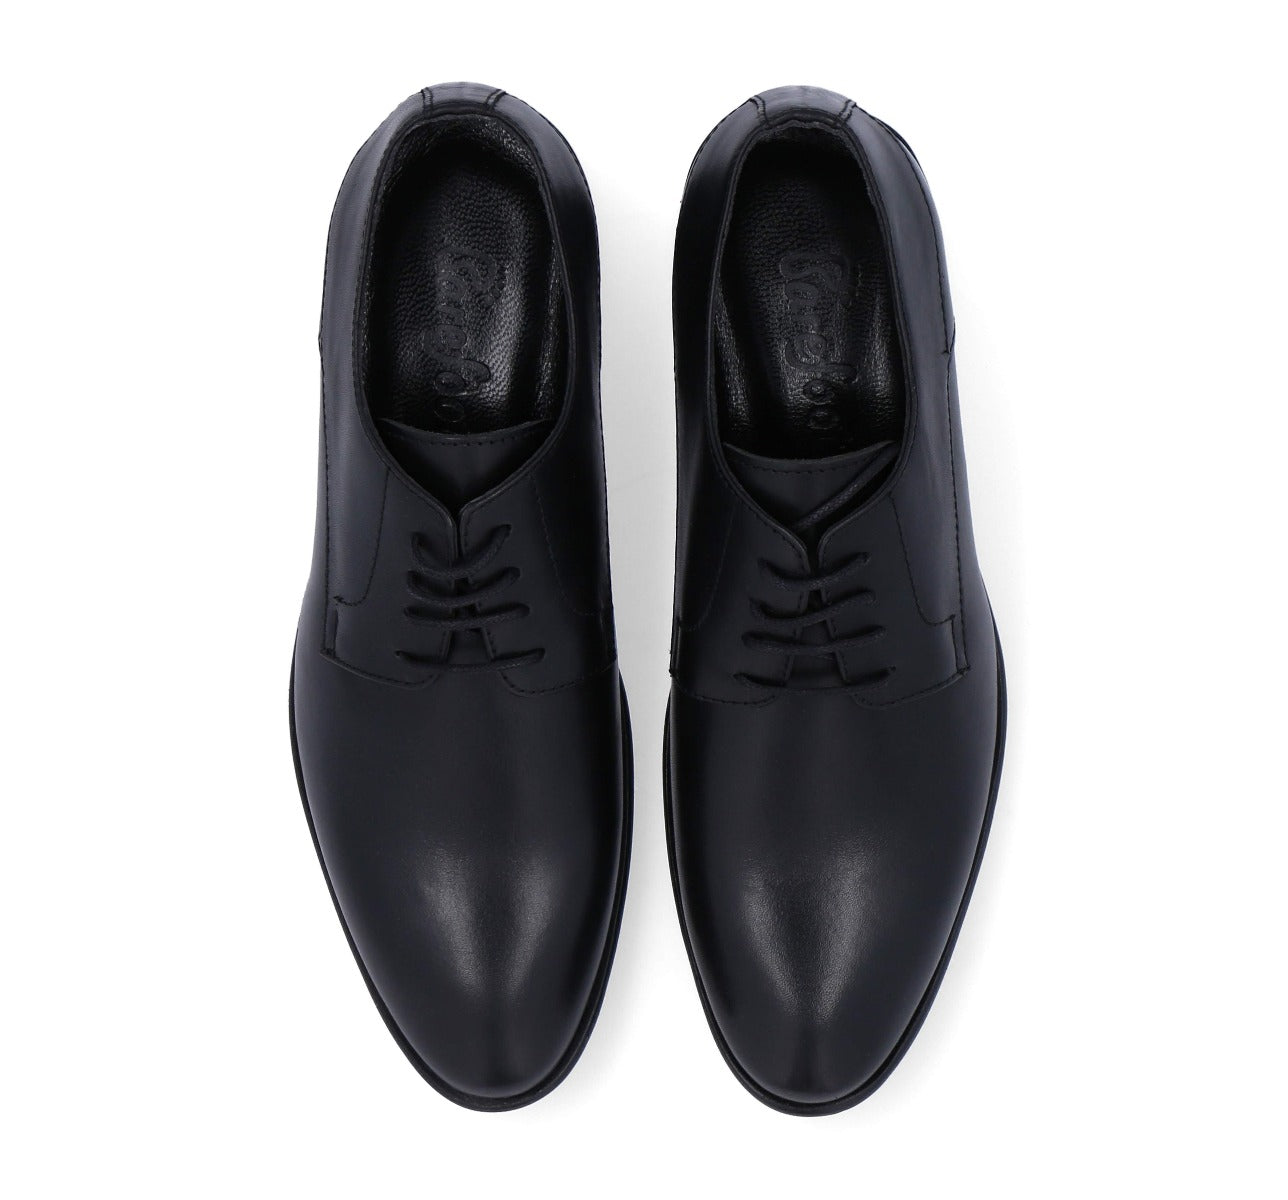 Barefoot Black Oxford Lace Up For Men 6213